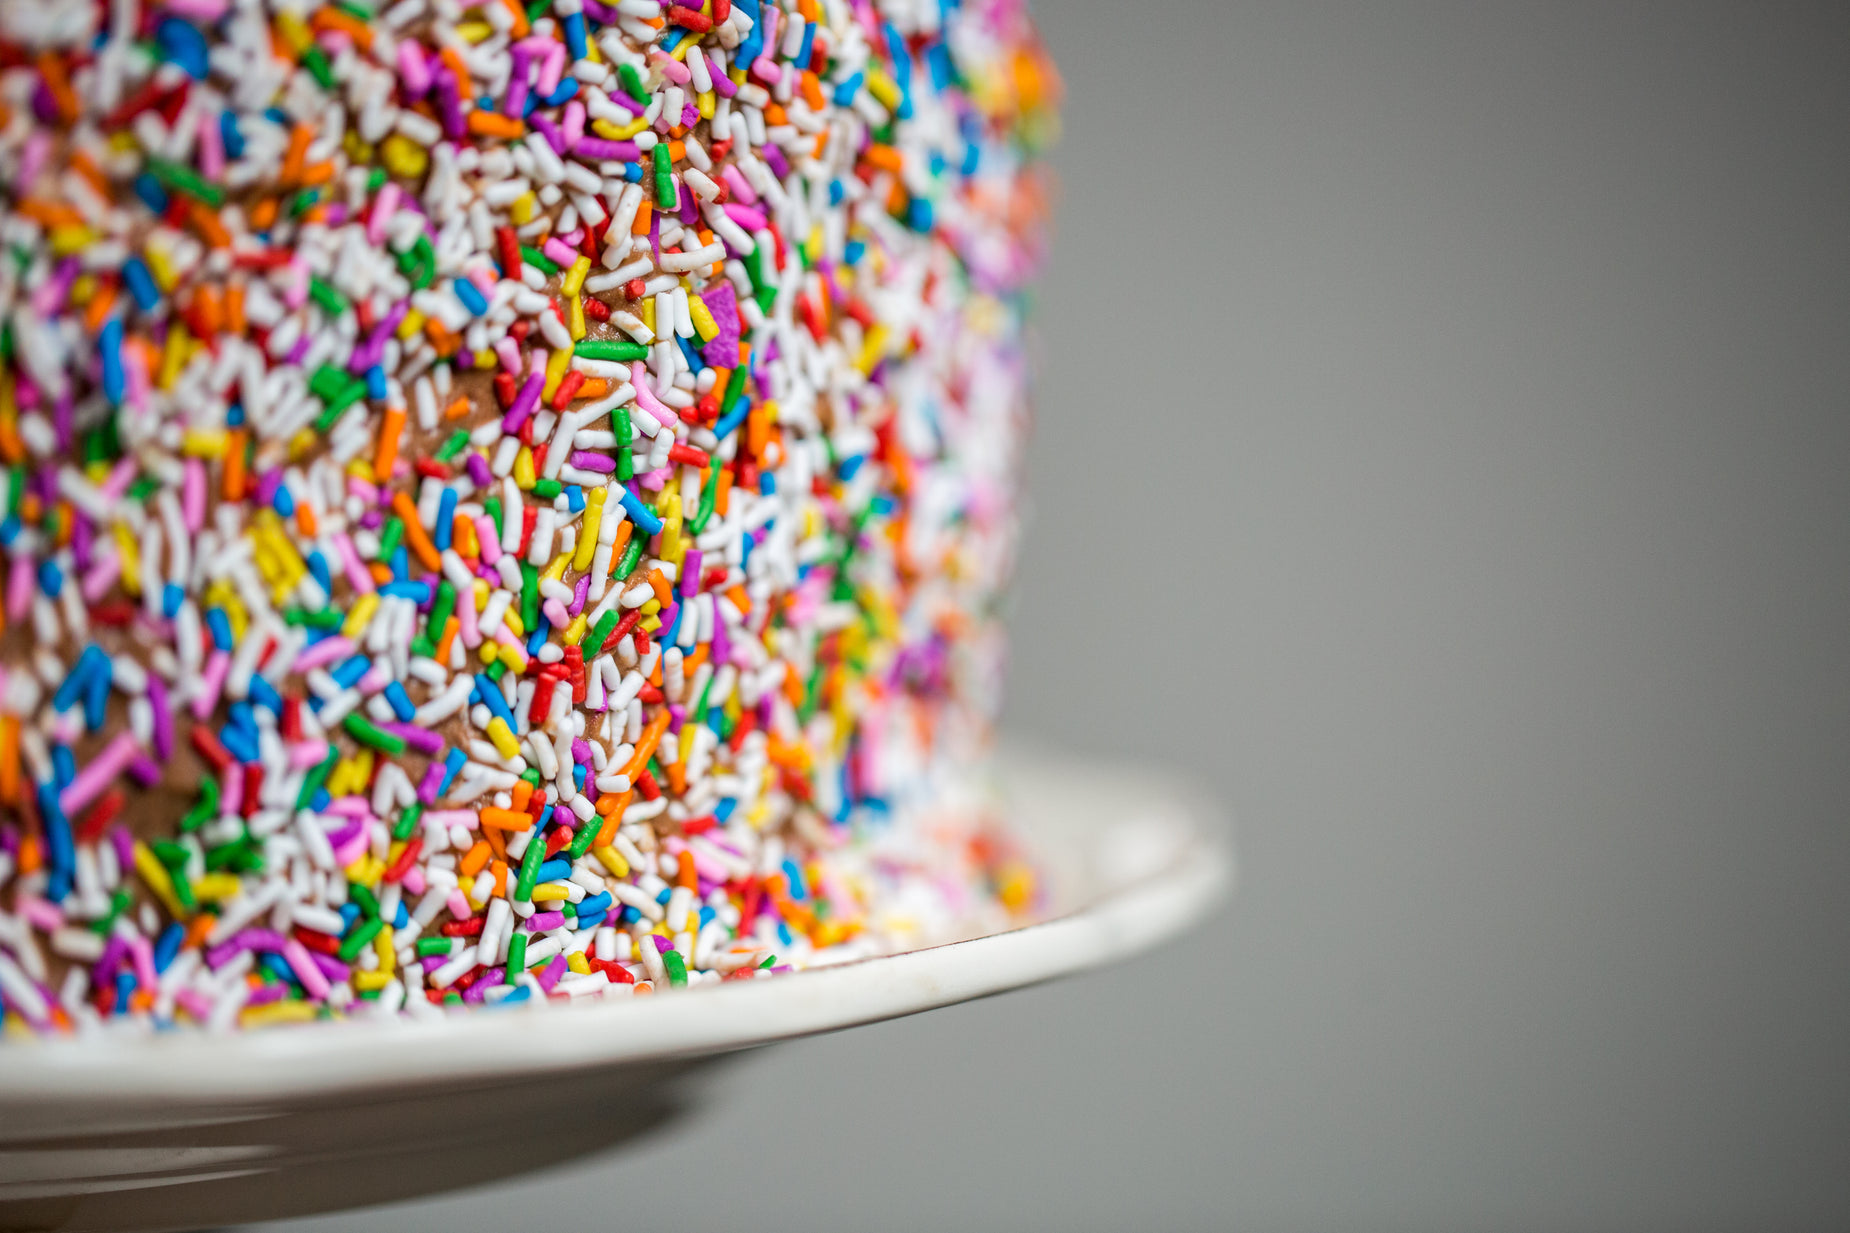 the cake is covered with sprinkles and multi - colored frosting